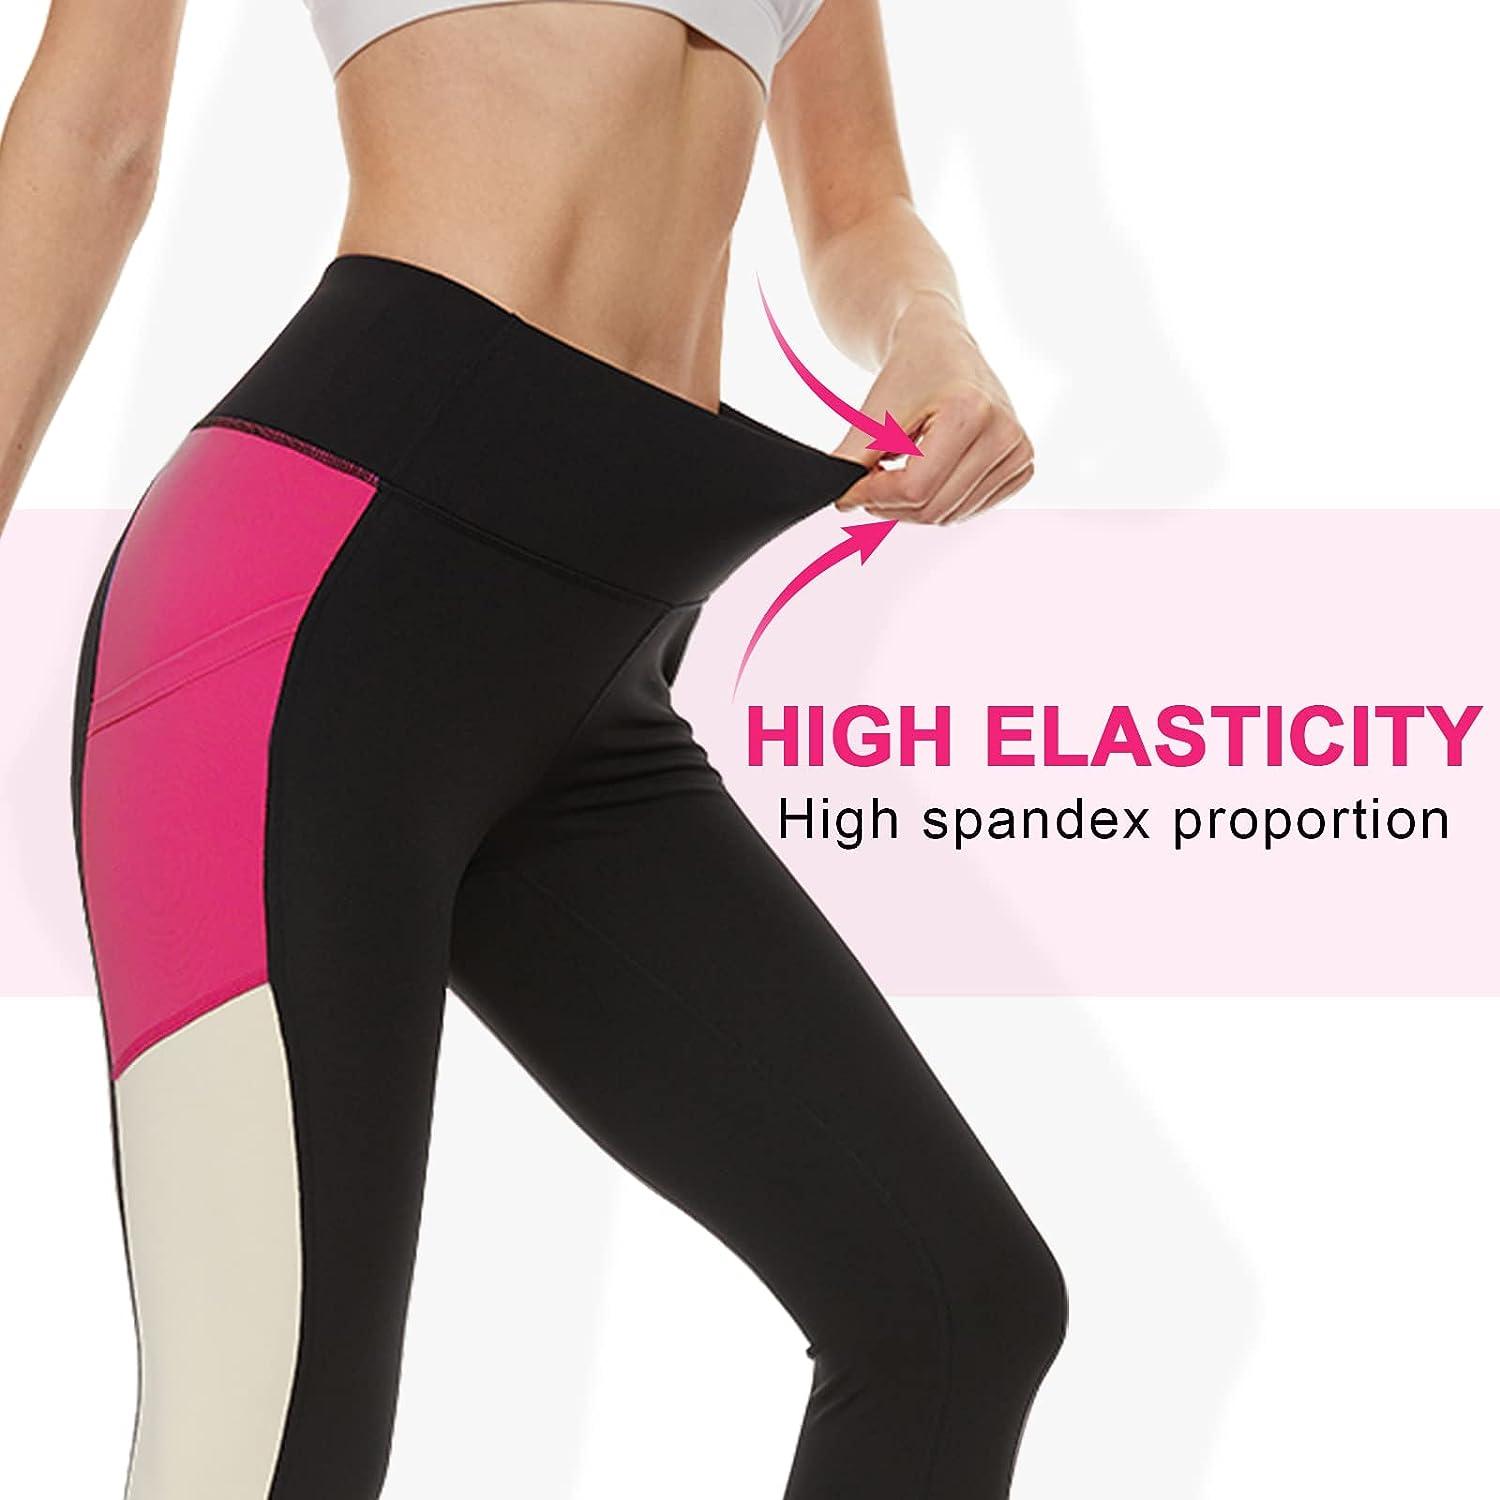 Fhine Womens Yoga Leggings with Pockets-High Waist Workout Pants 7